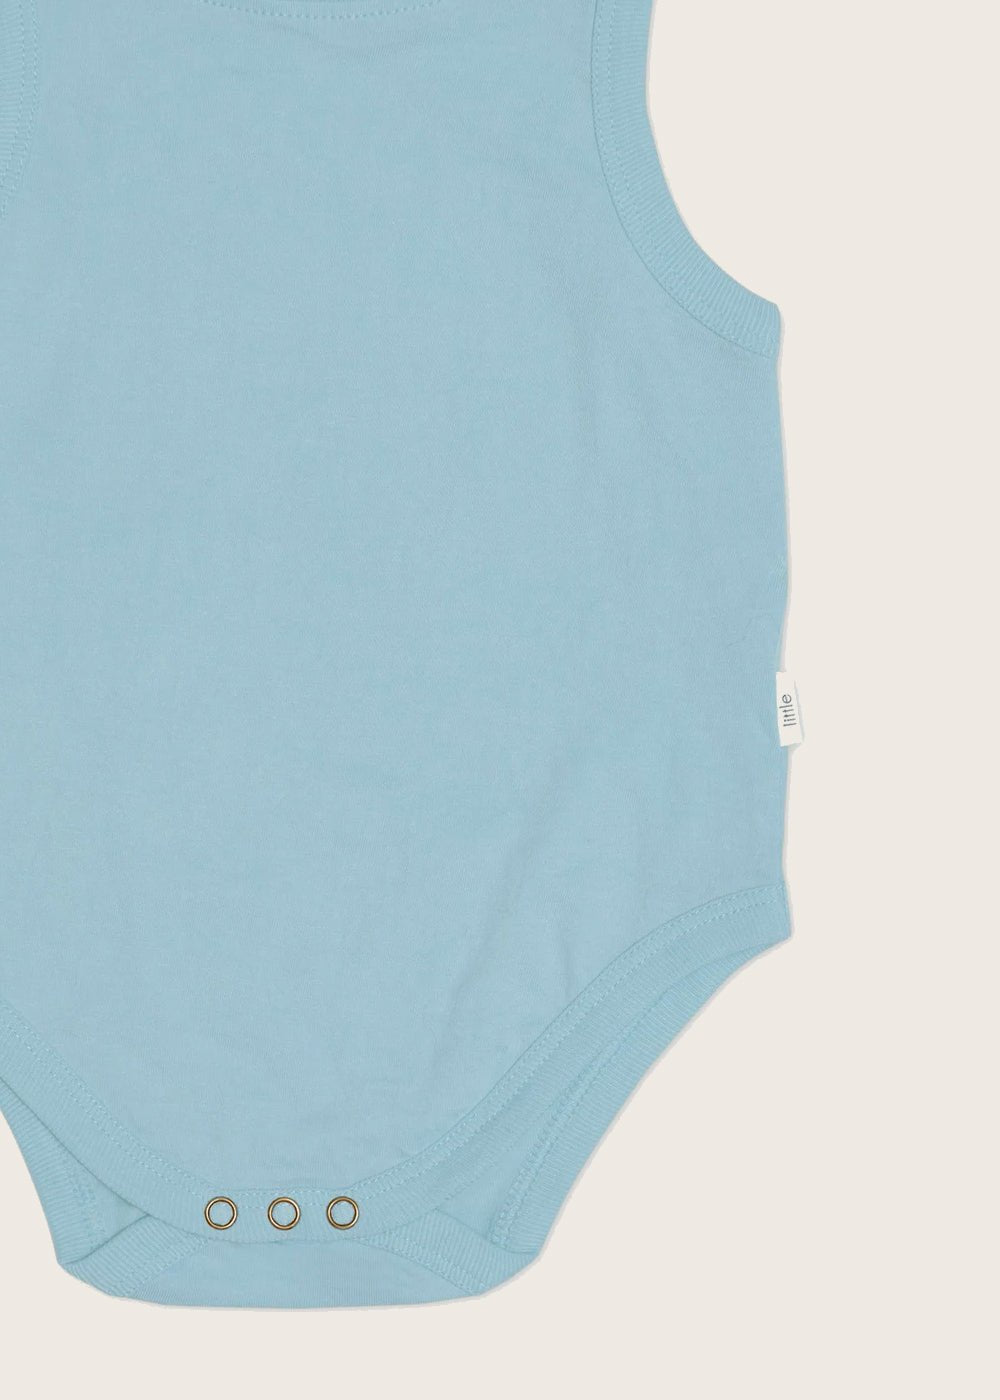 Little Elinor by NICO Powder Blue Baby Singlet Onesie - New Classics Studios Sustainable Ethical Fashion Canada